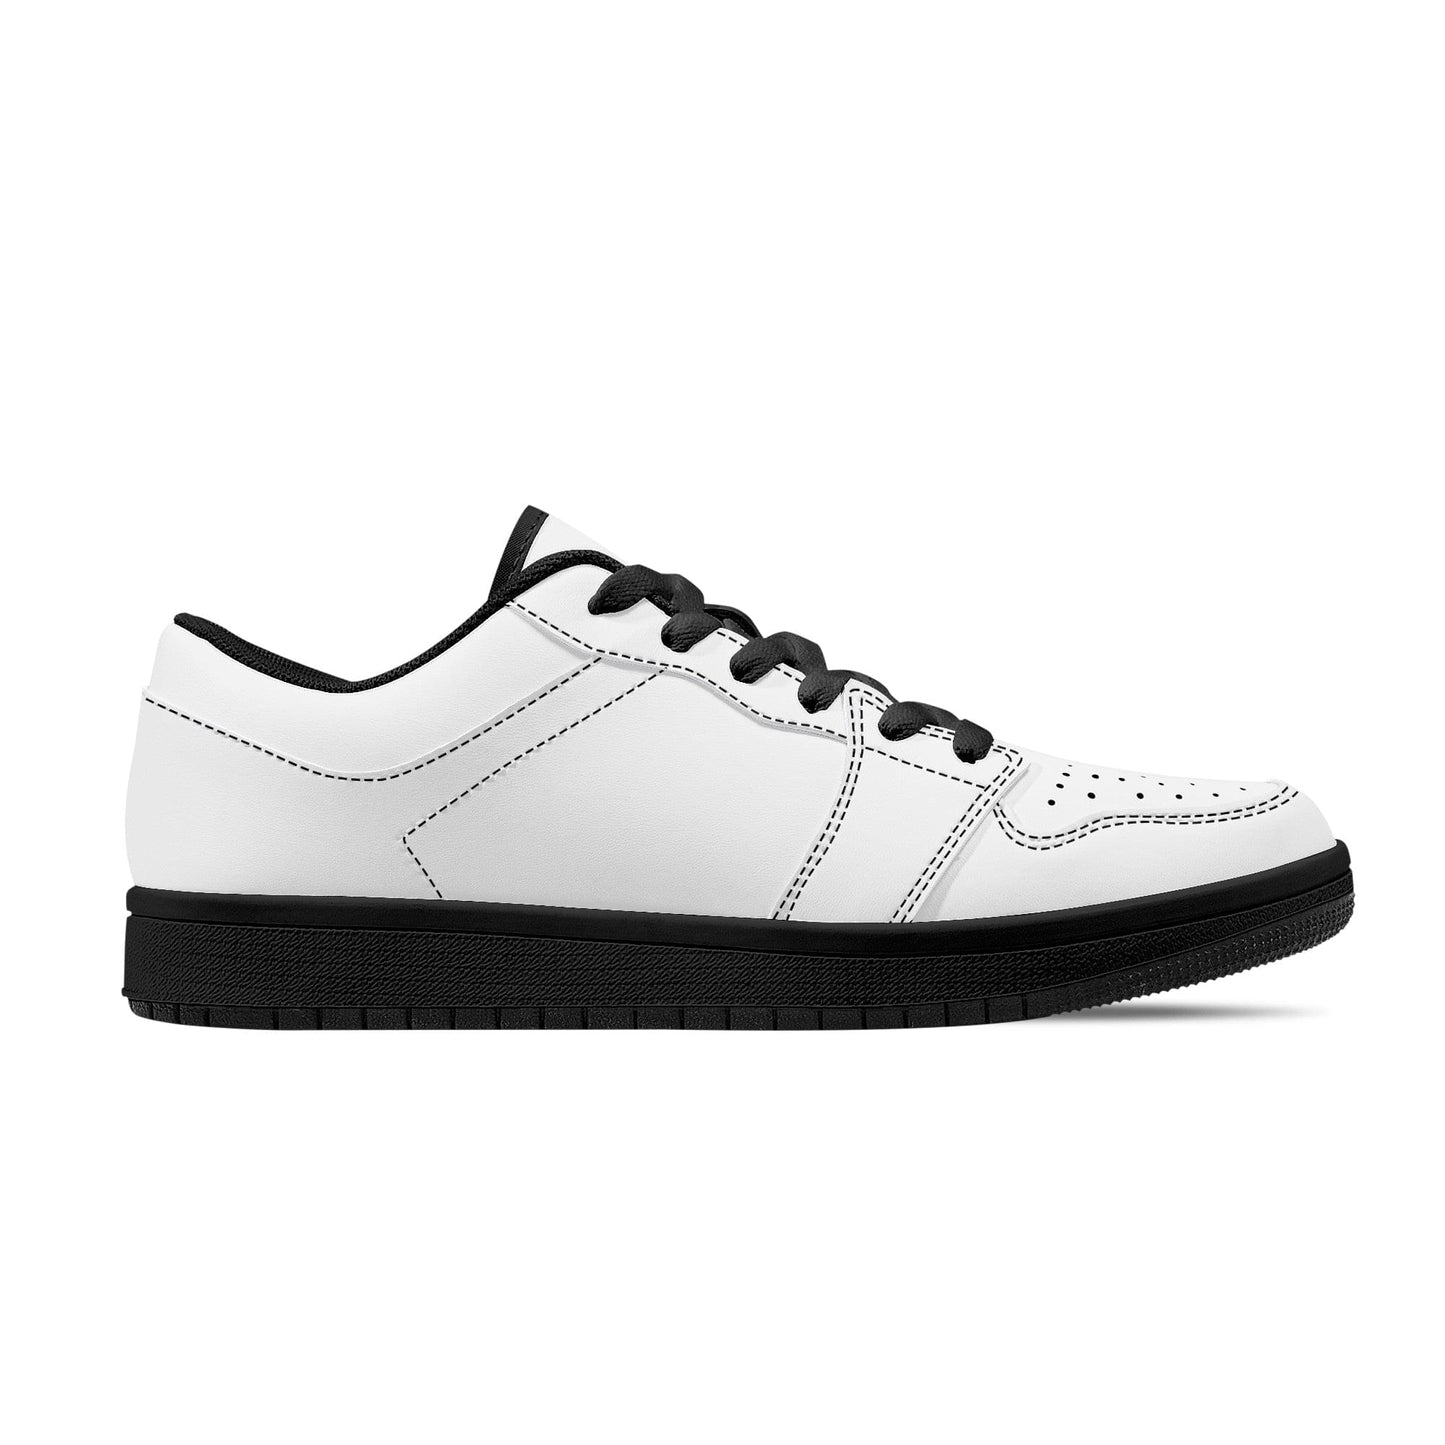 Custom Low Top Sneakers - Black Sole D15 Colloid Colors 